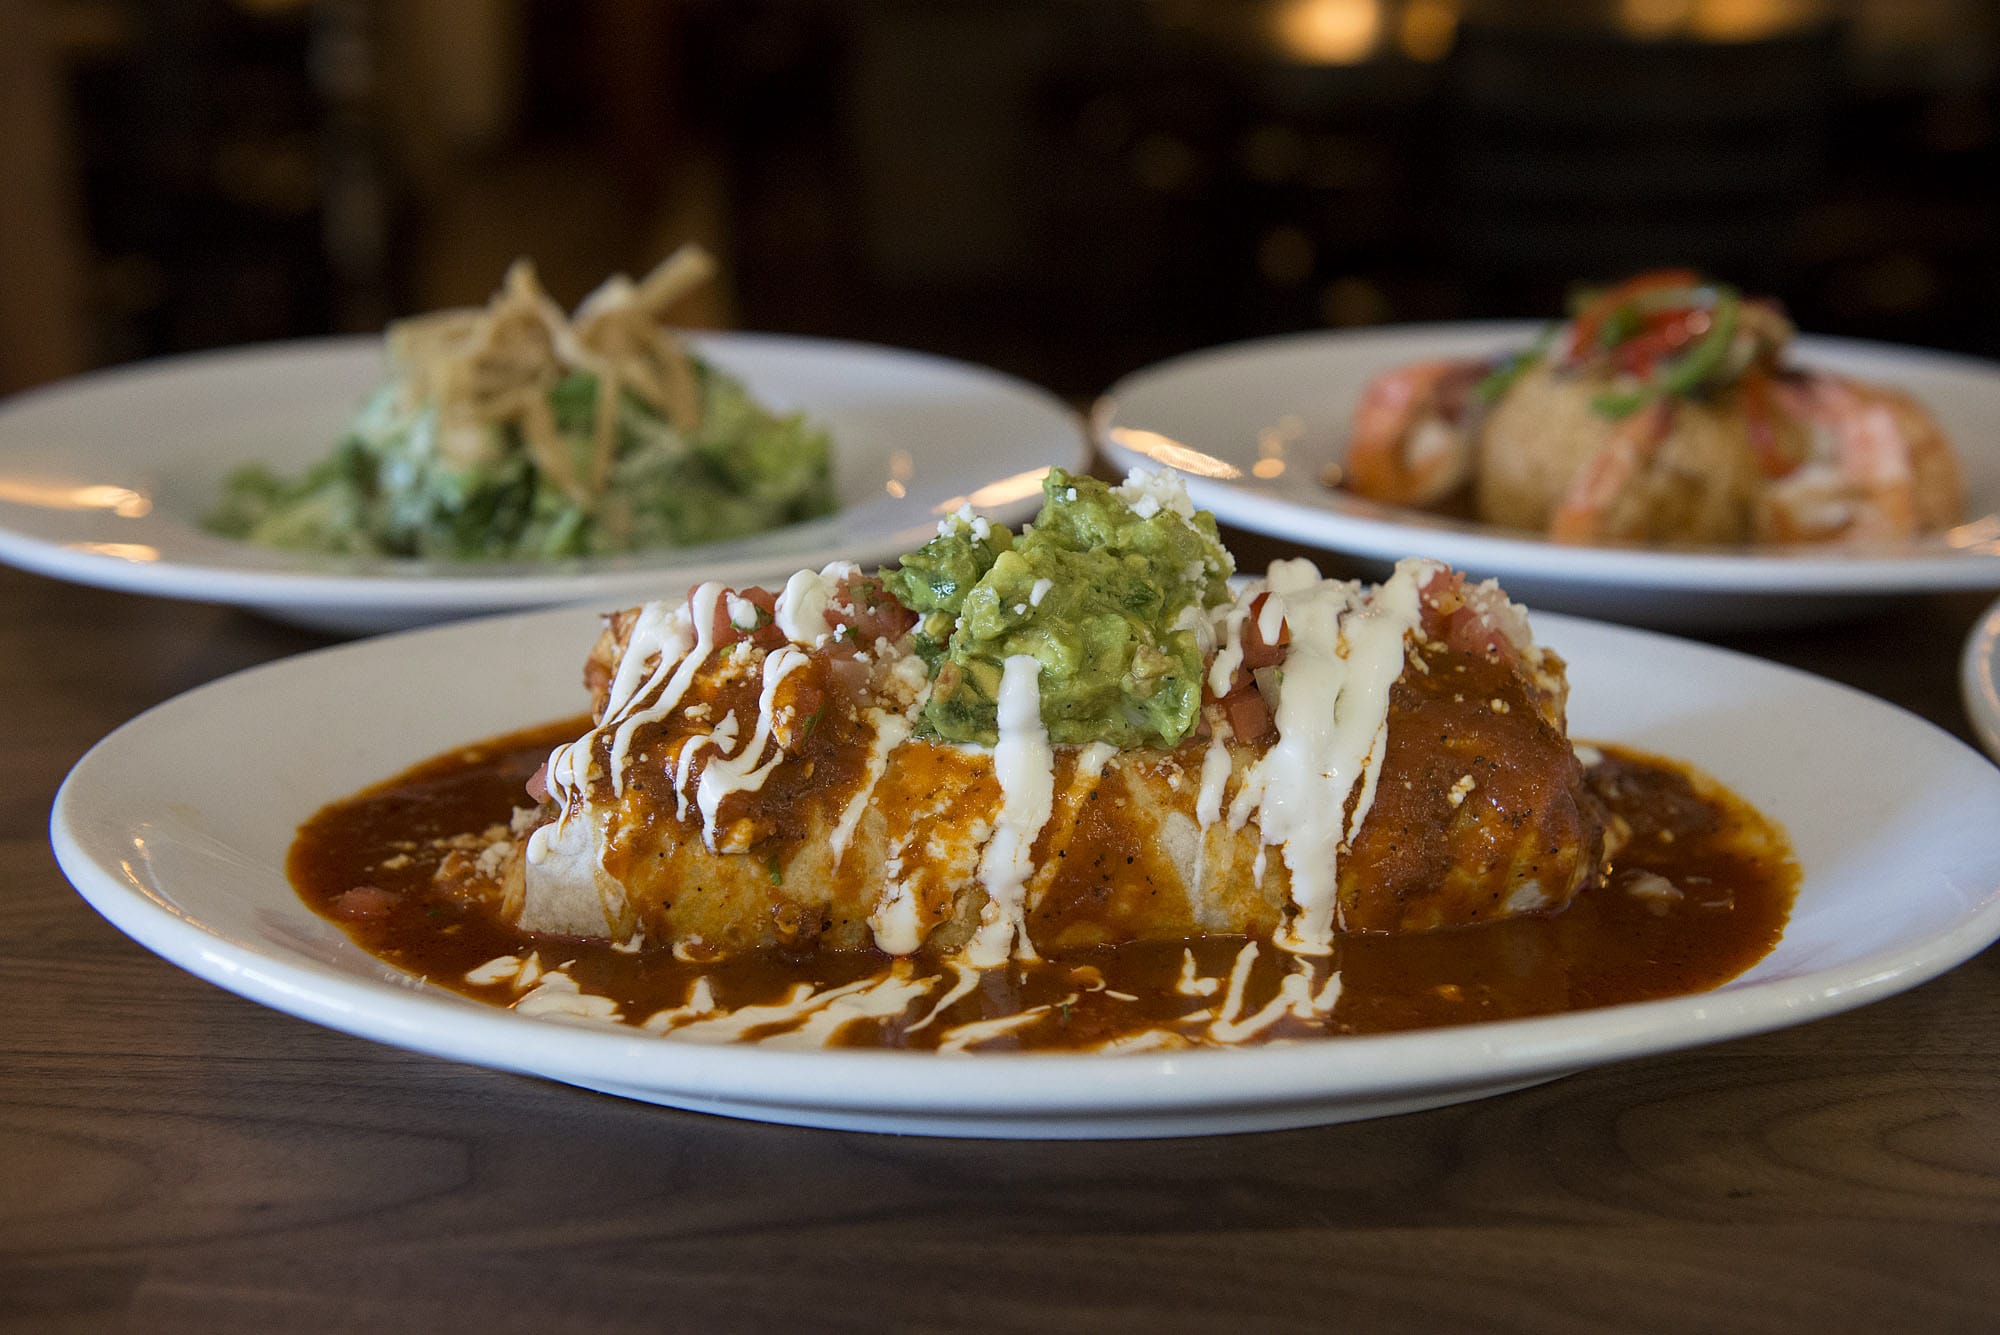 The Chili Colorado Burrito is among the items served at Trago Mexican Kitchen at Westfield Vancouver on Tuesday morning, August 25, 2015.